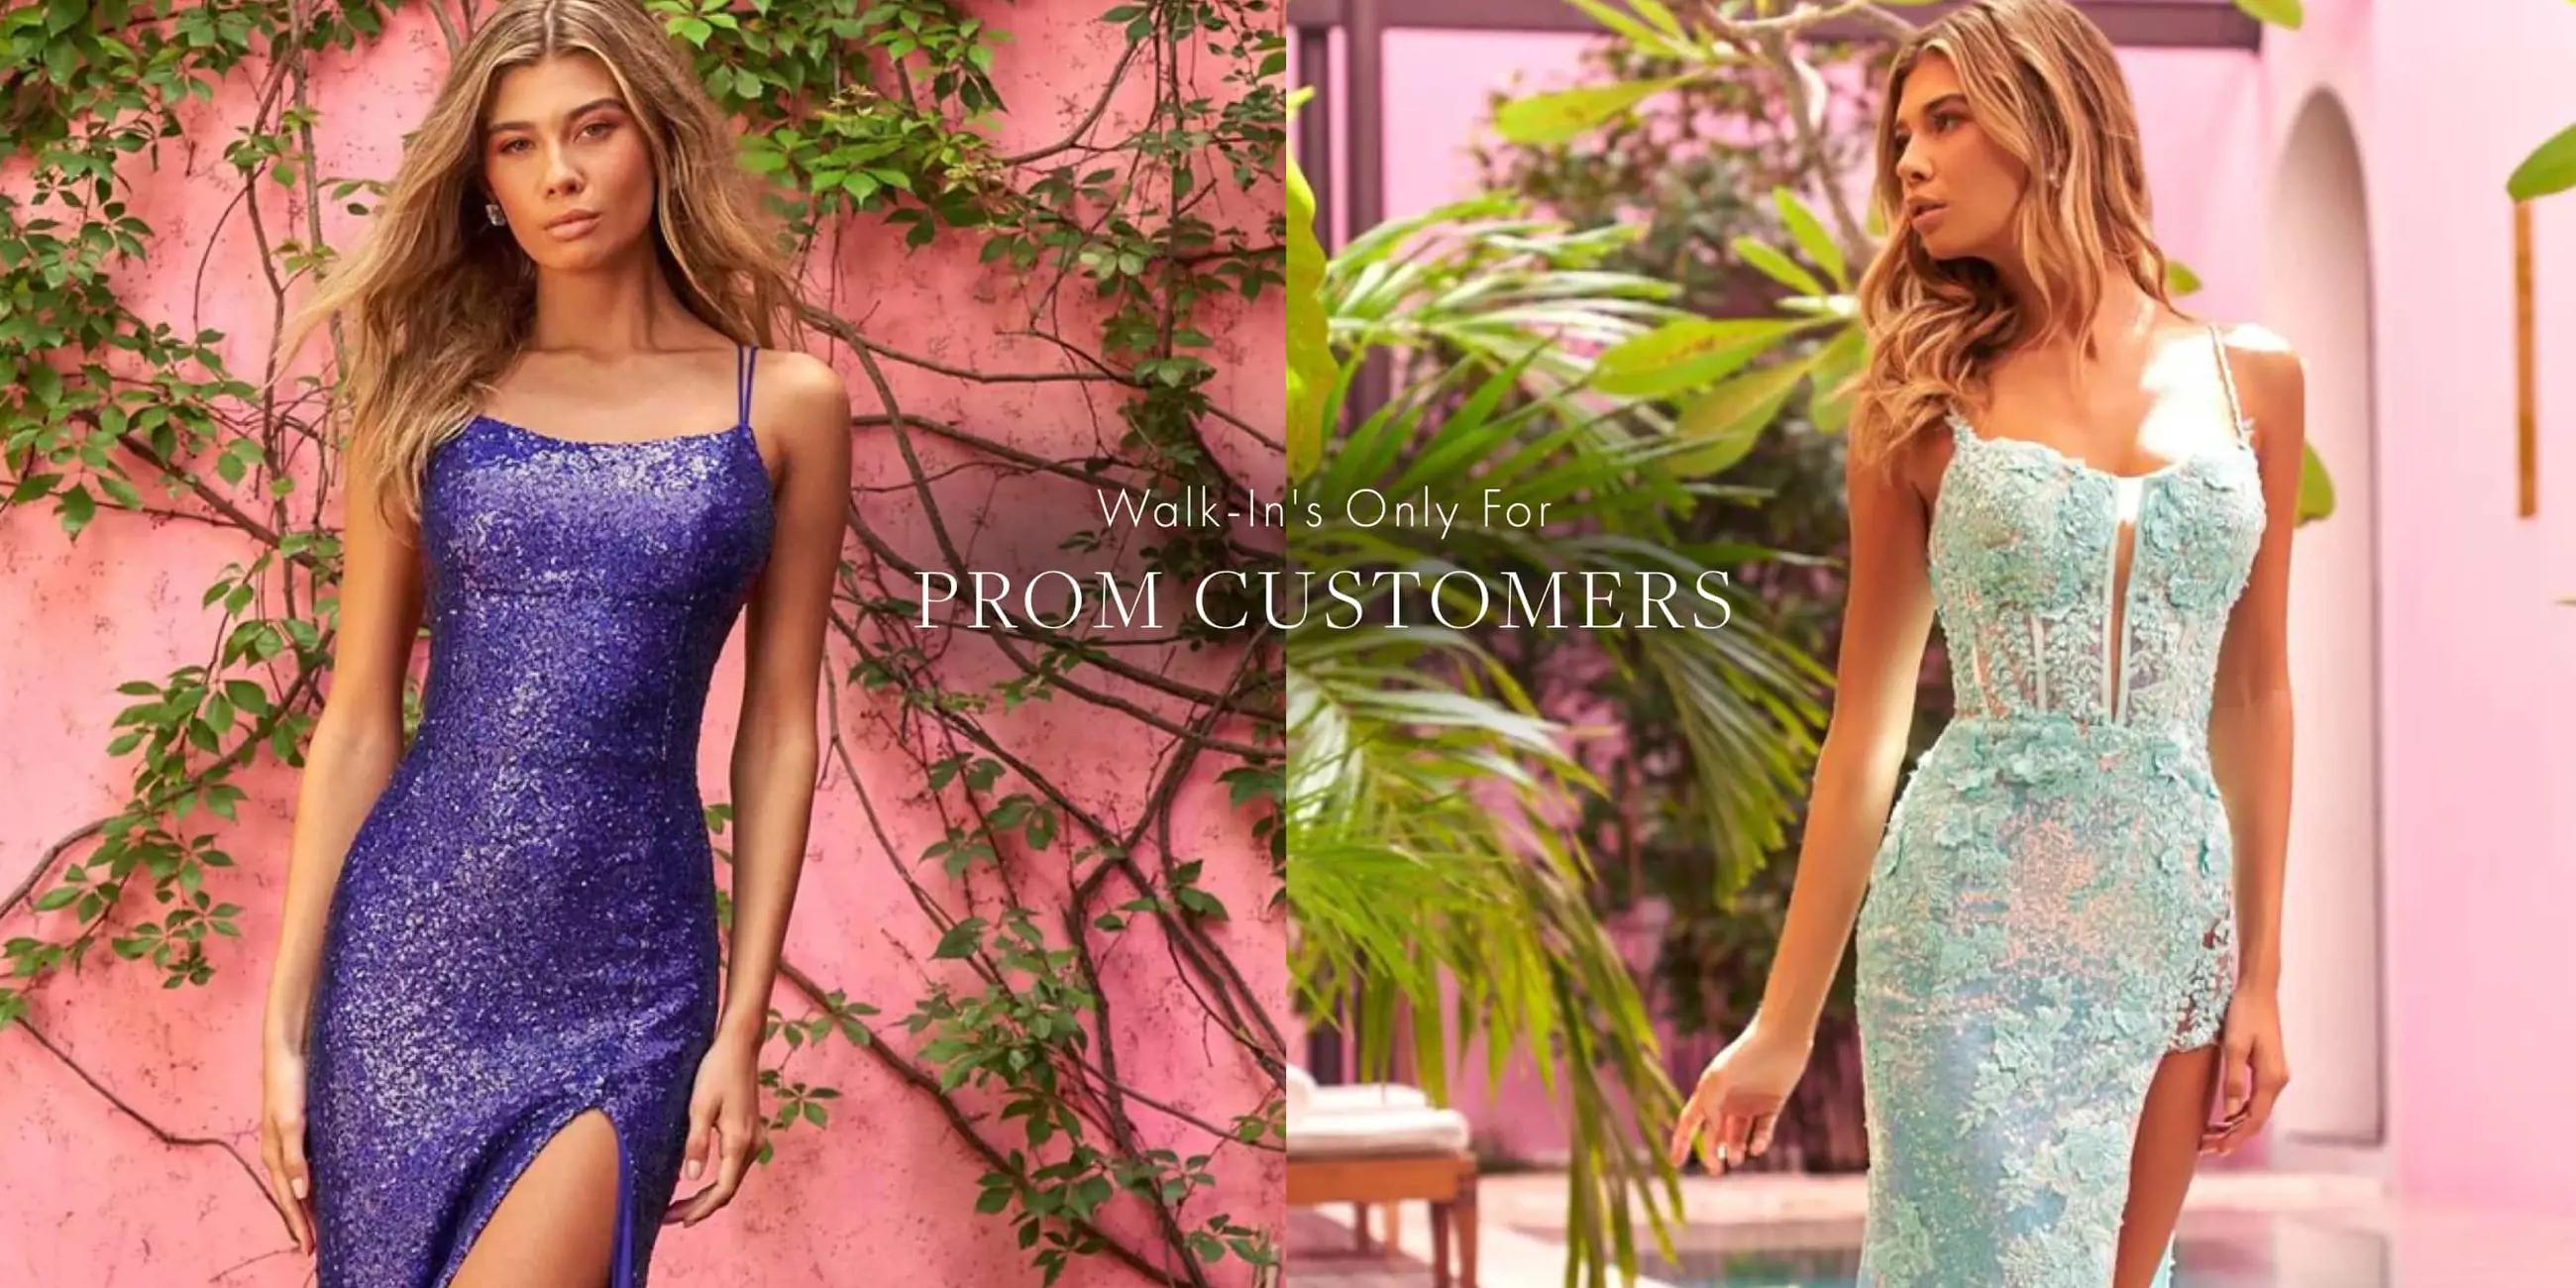 walk-ins only for prom!